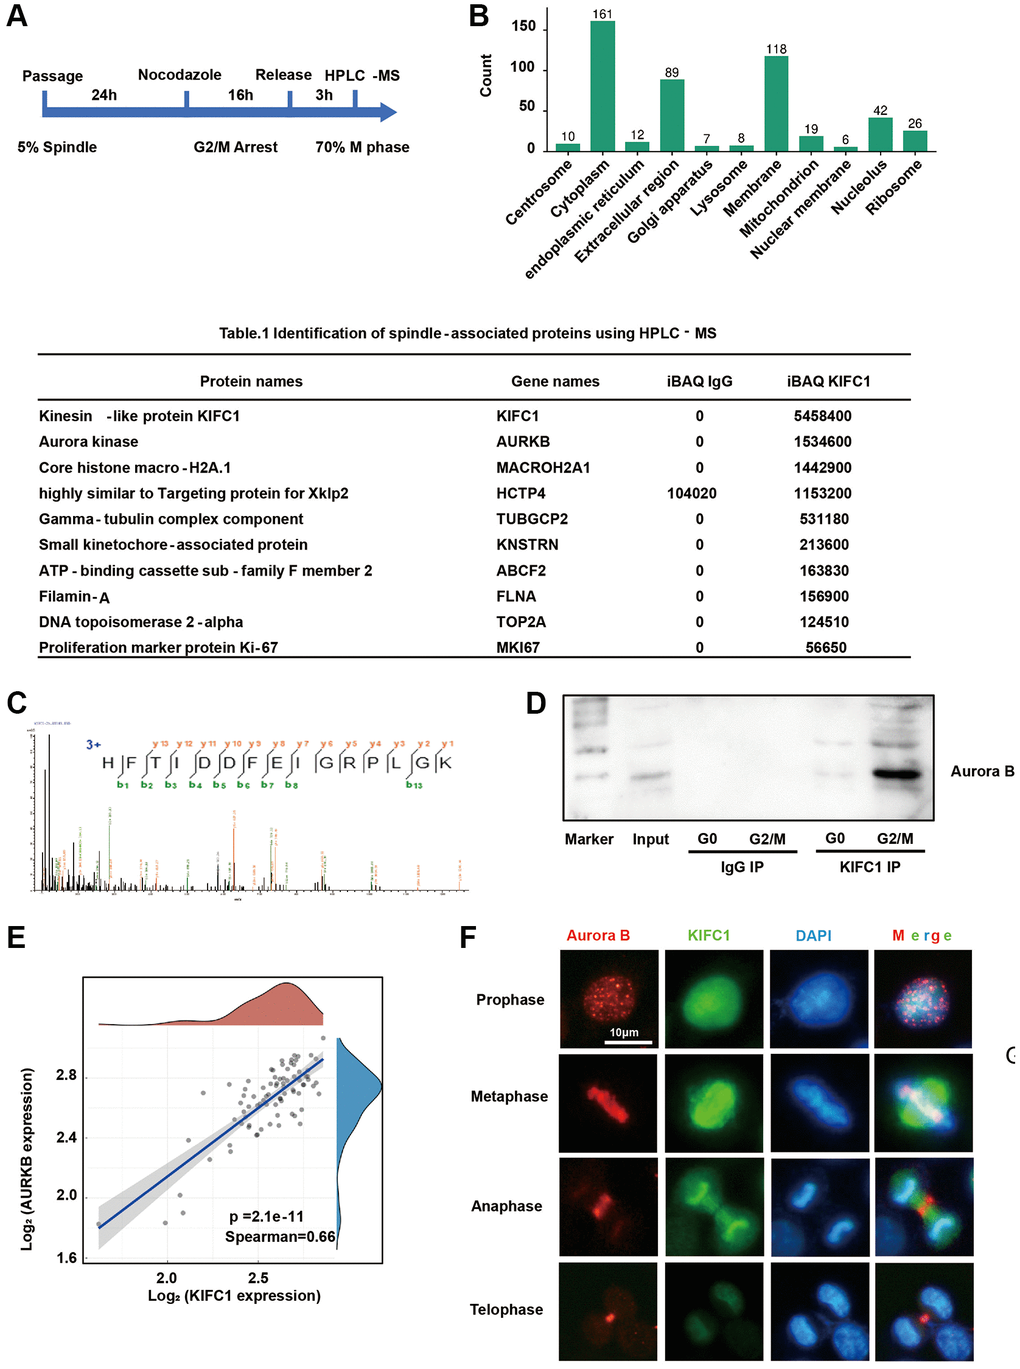 Proteomic analysis reveals protein interactions with KIFC1. (A) Flow chart of metaphase cell; (B) GO cluster of identification results, clustering according to organelles; (C) Mass spectrum peak of Aurora B; (D) Immunoprecipitation with anti KIFC1 antibody and detect Aurora B content through western blot; (E) Bioinformatics analysis of the correlation between KIFC1 and Aurora B mRNA expression; (F) immunofluorescence stain of KIFC1 (green) and Aurora B (red), DNA were stained with DAPI (blue).